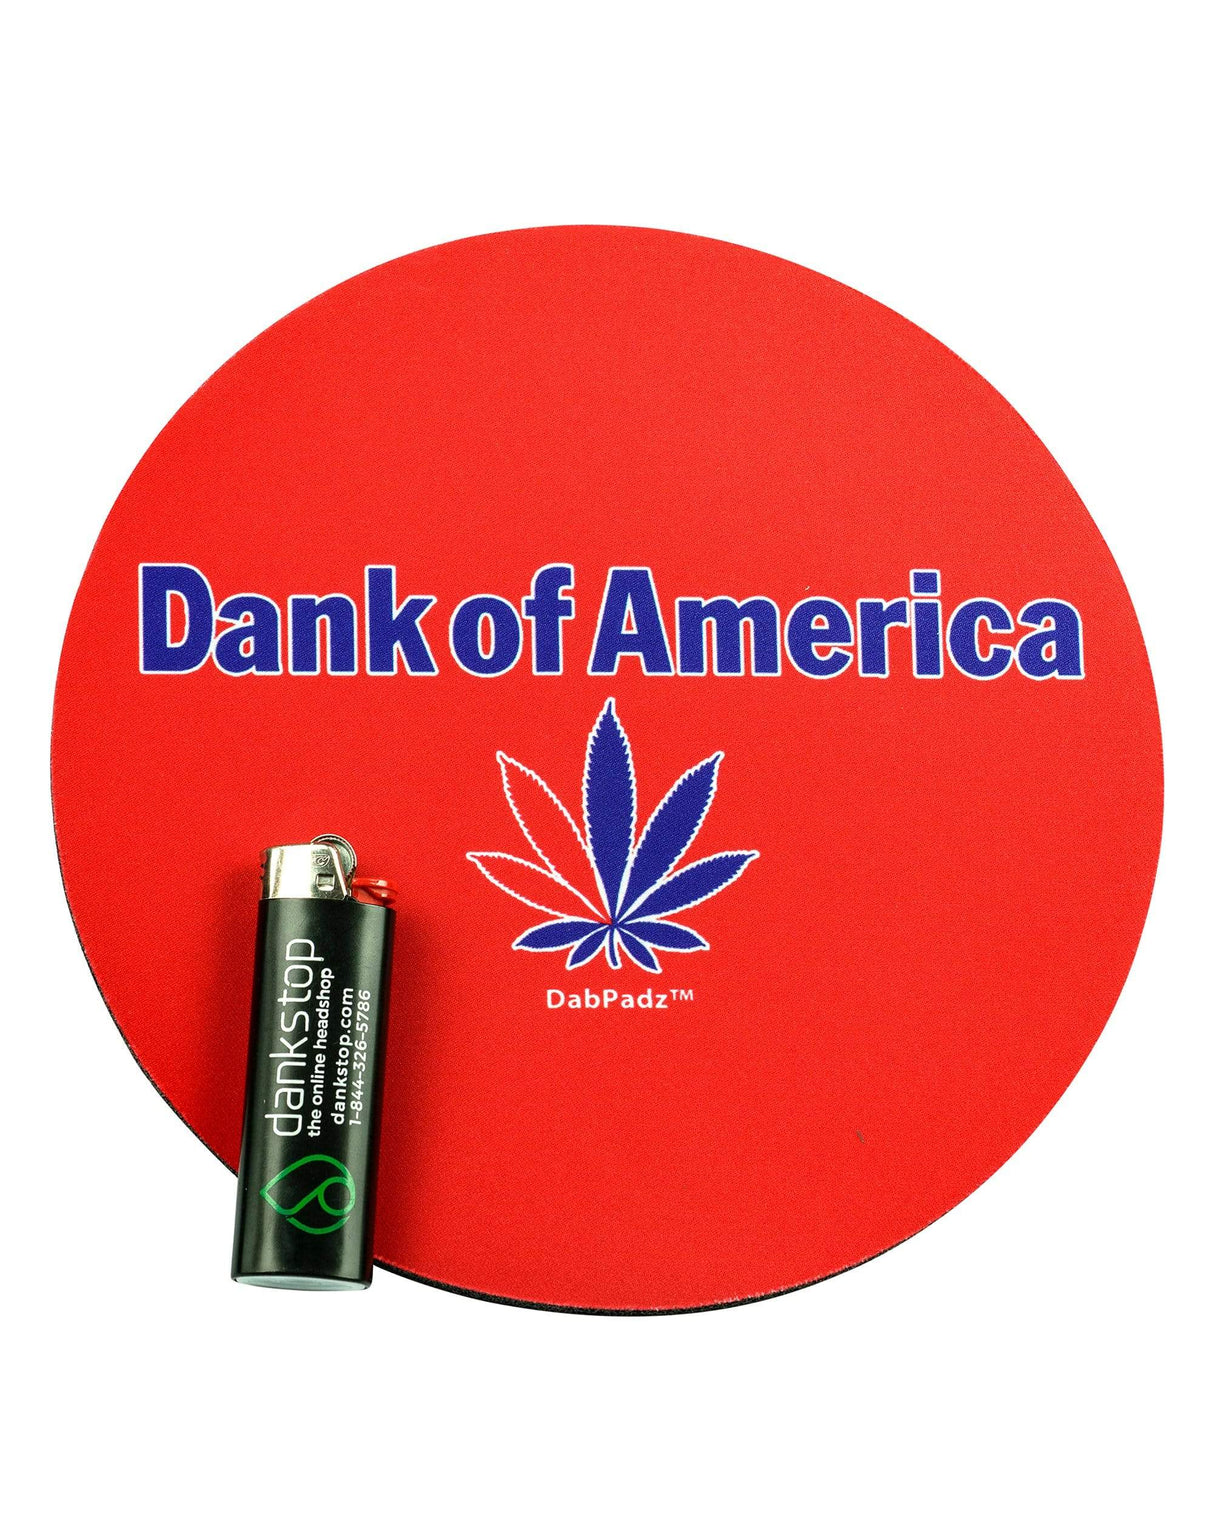 DabPadz 8" Red Rubber Dropmat for Concentrates with DankStop Lighter - Top View